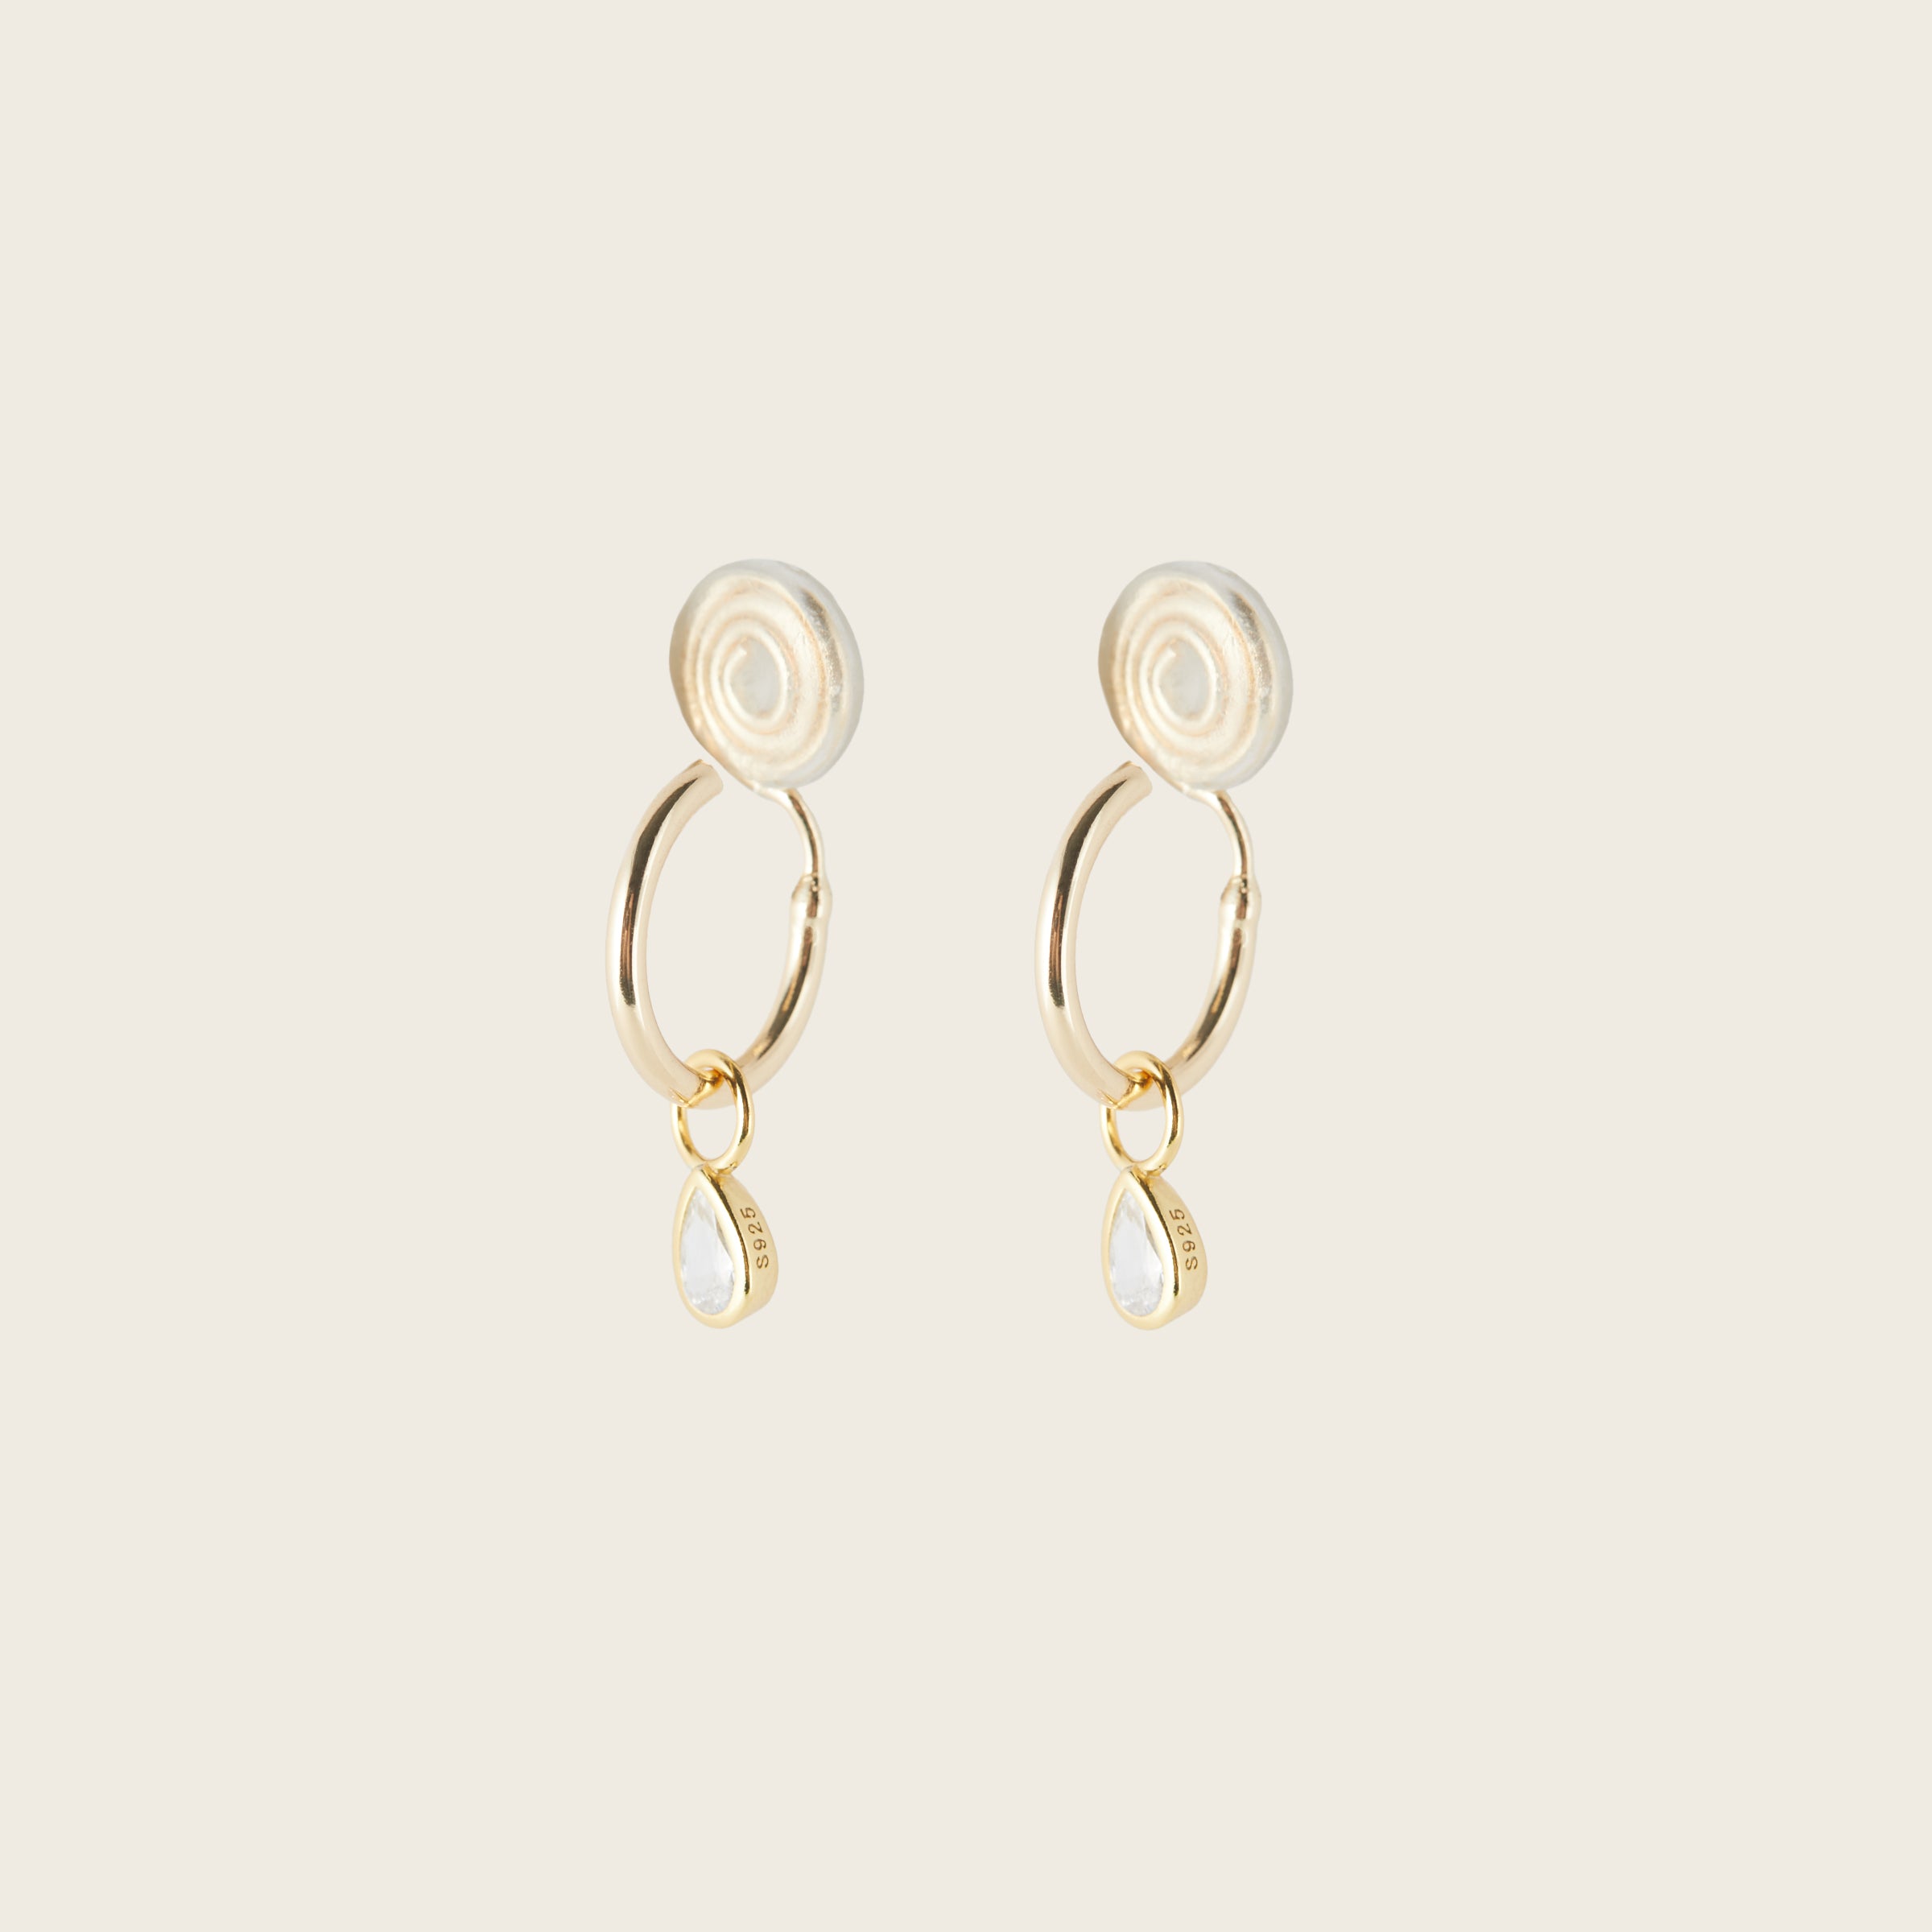 Image of the Teardrop Hoop Charms are made with high-quality materials, including 18K gold plating over 925 Sterling Silver. These charms are both non-tarnish and water resistant. The perfect combination of style and durability.